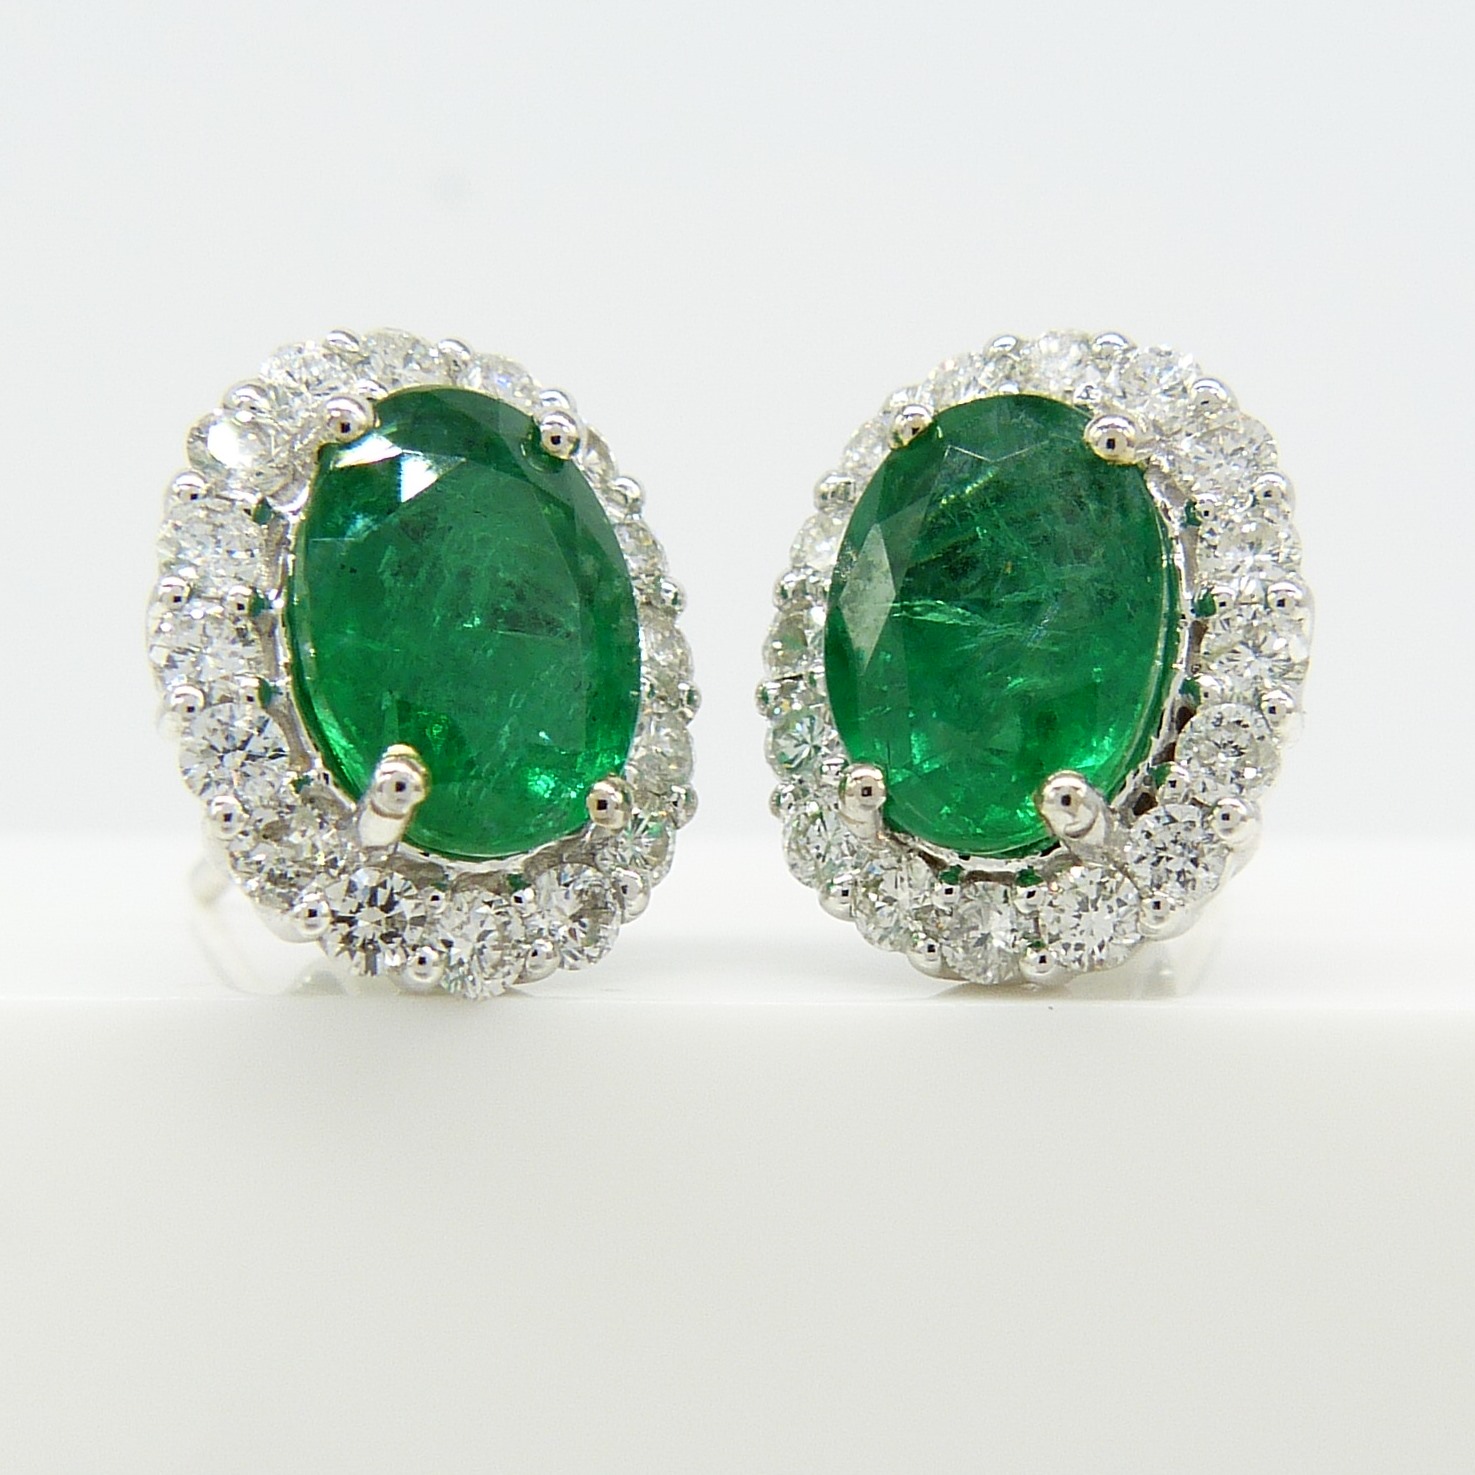 Pair of 18ct white gold 2.48 carat emerald and diamond halo ear studs, boxed - Image 5 of 8